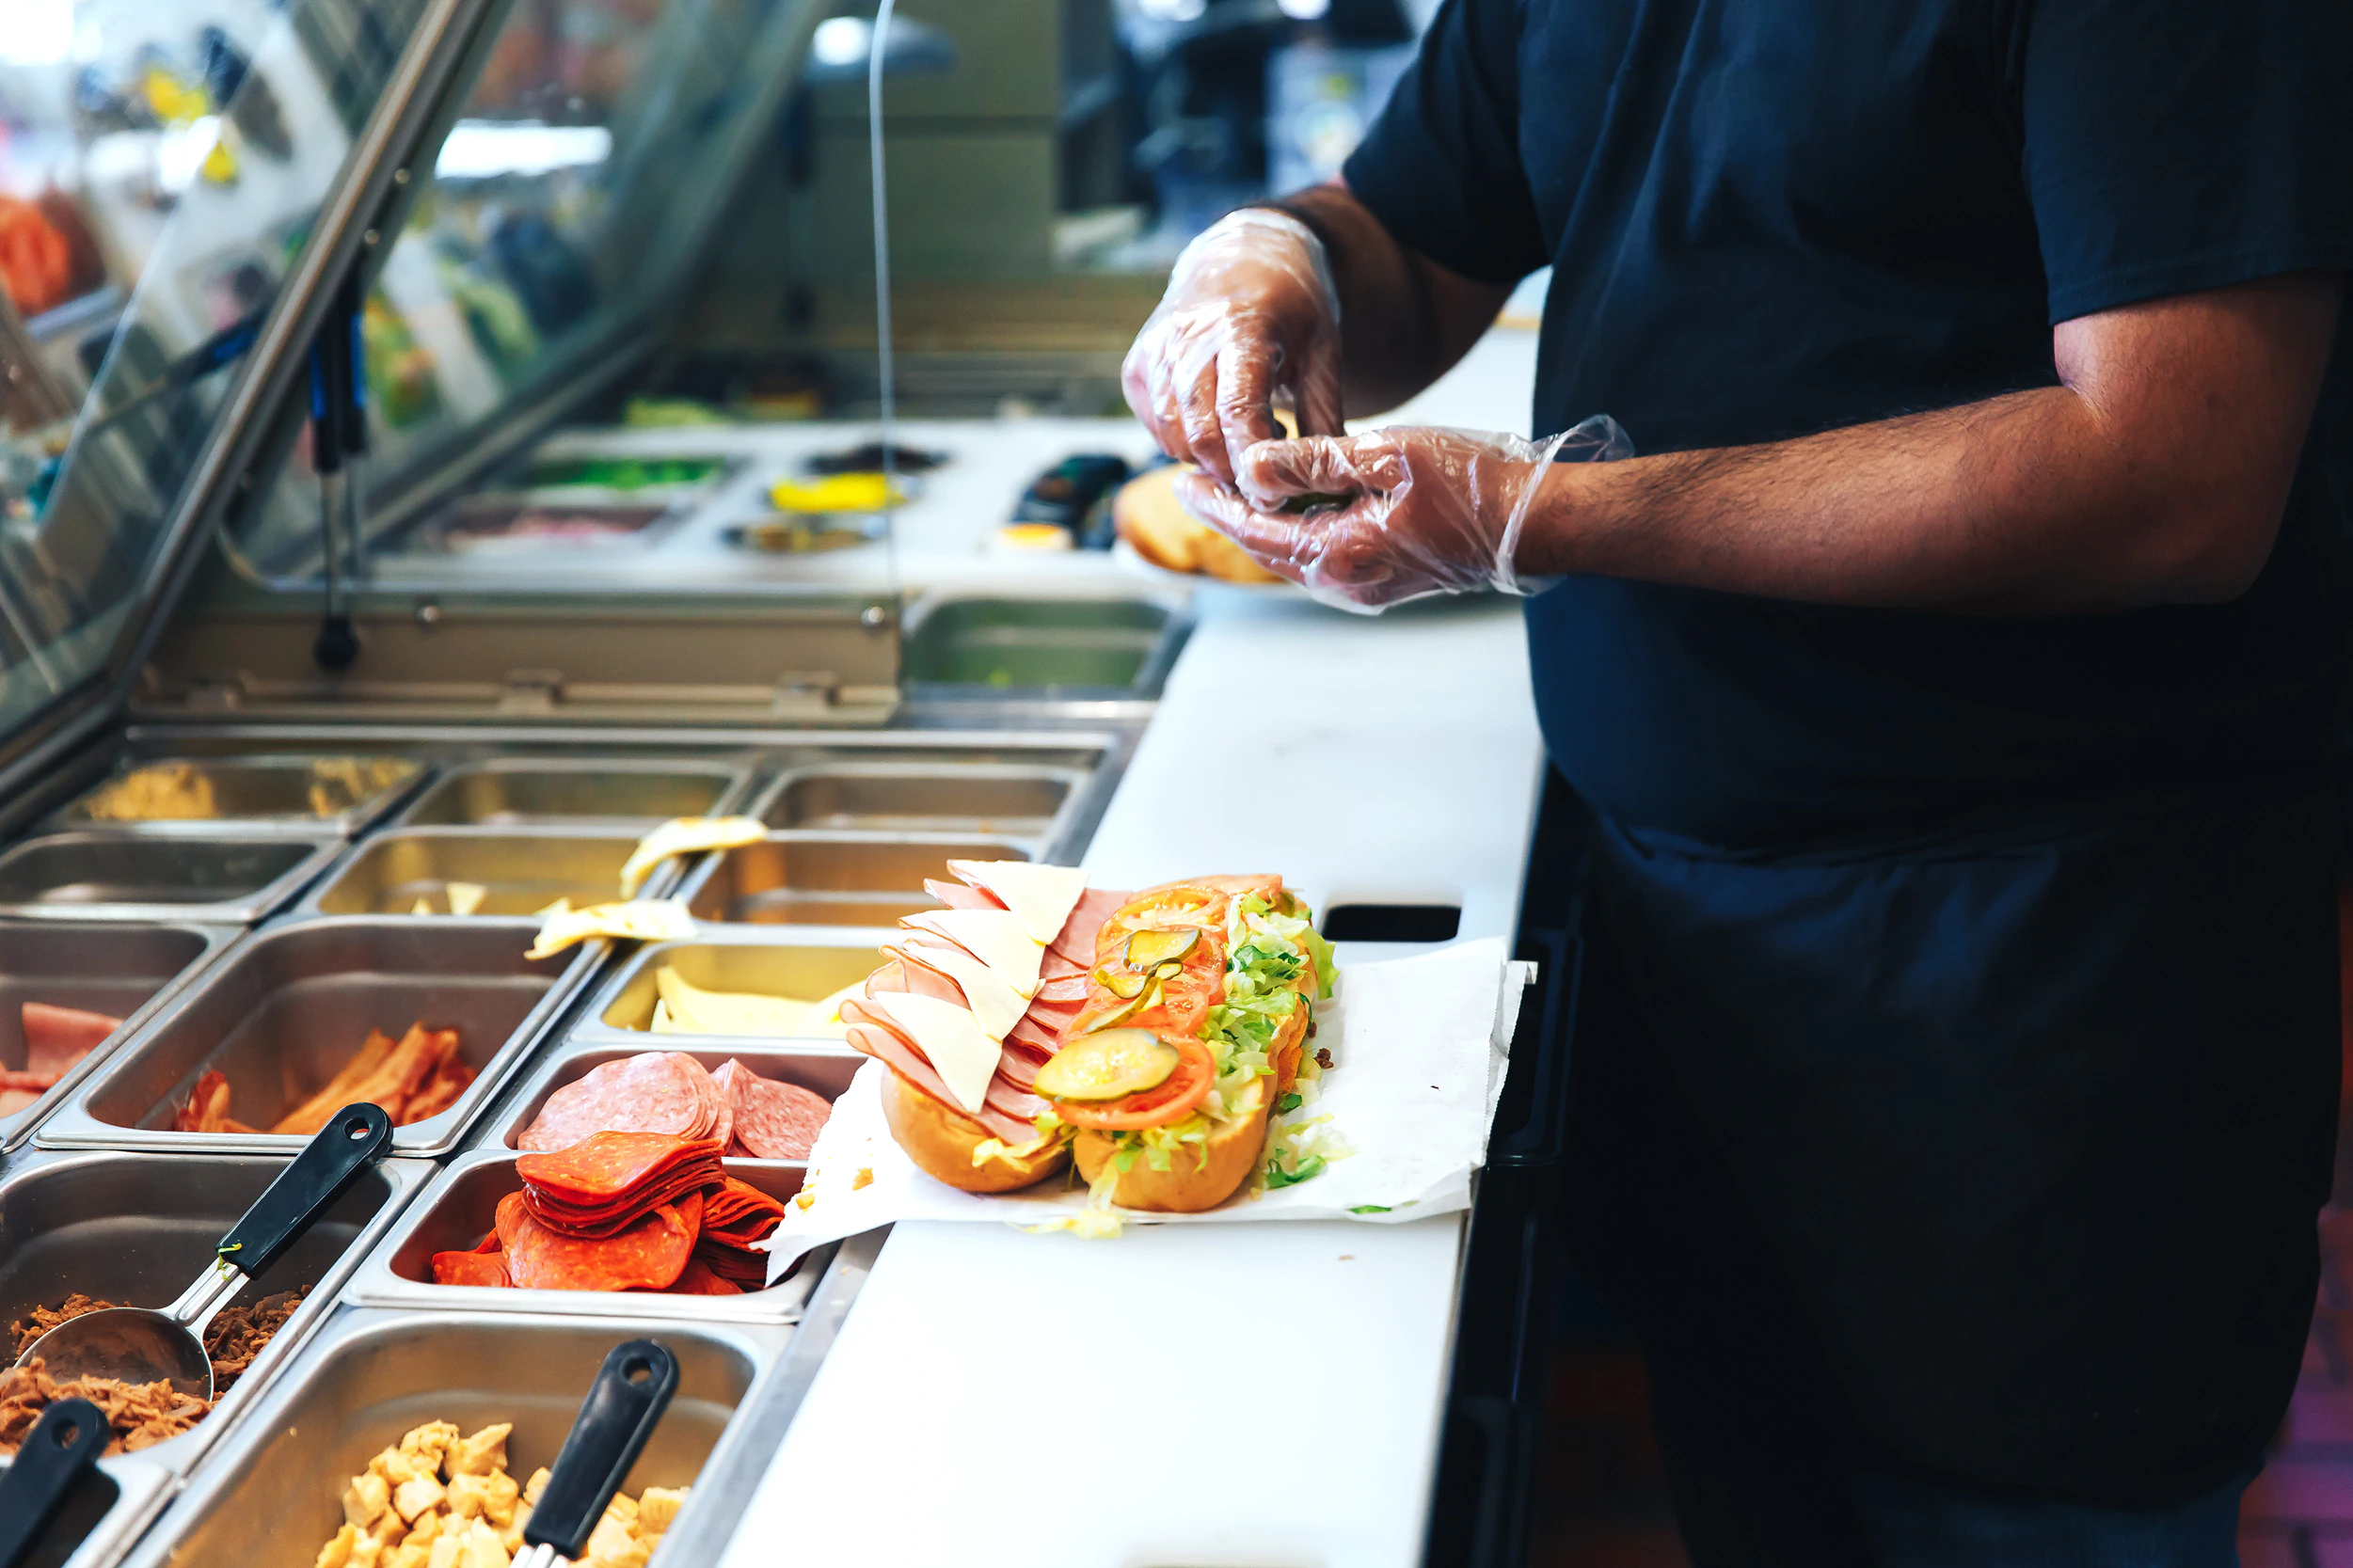 Supply Chain Risk Assessment for Fast Food Industry